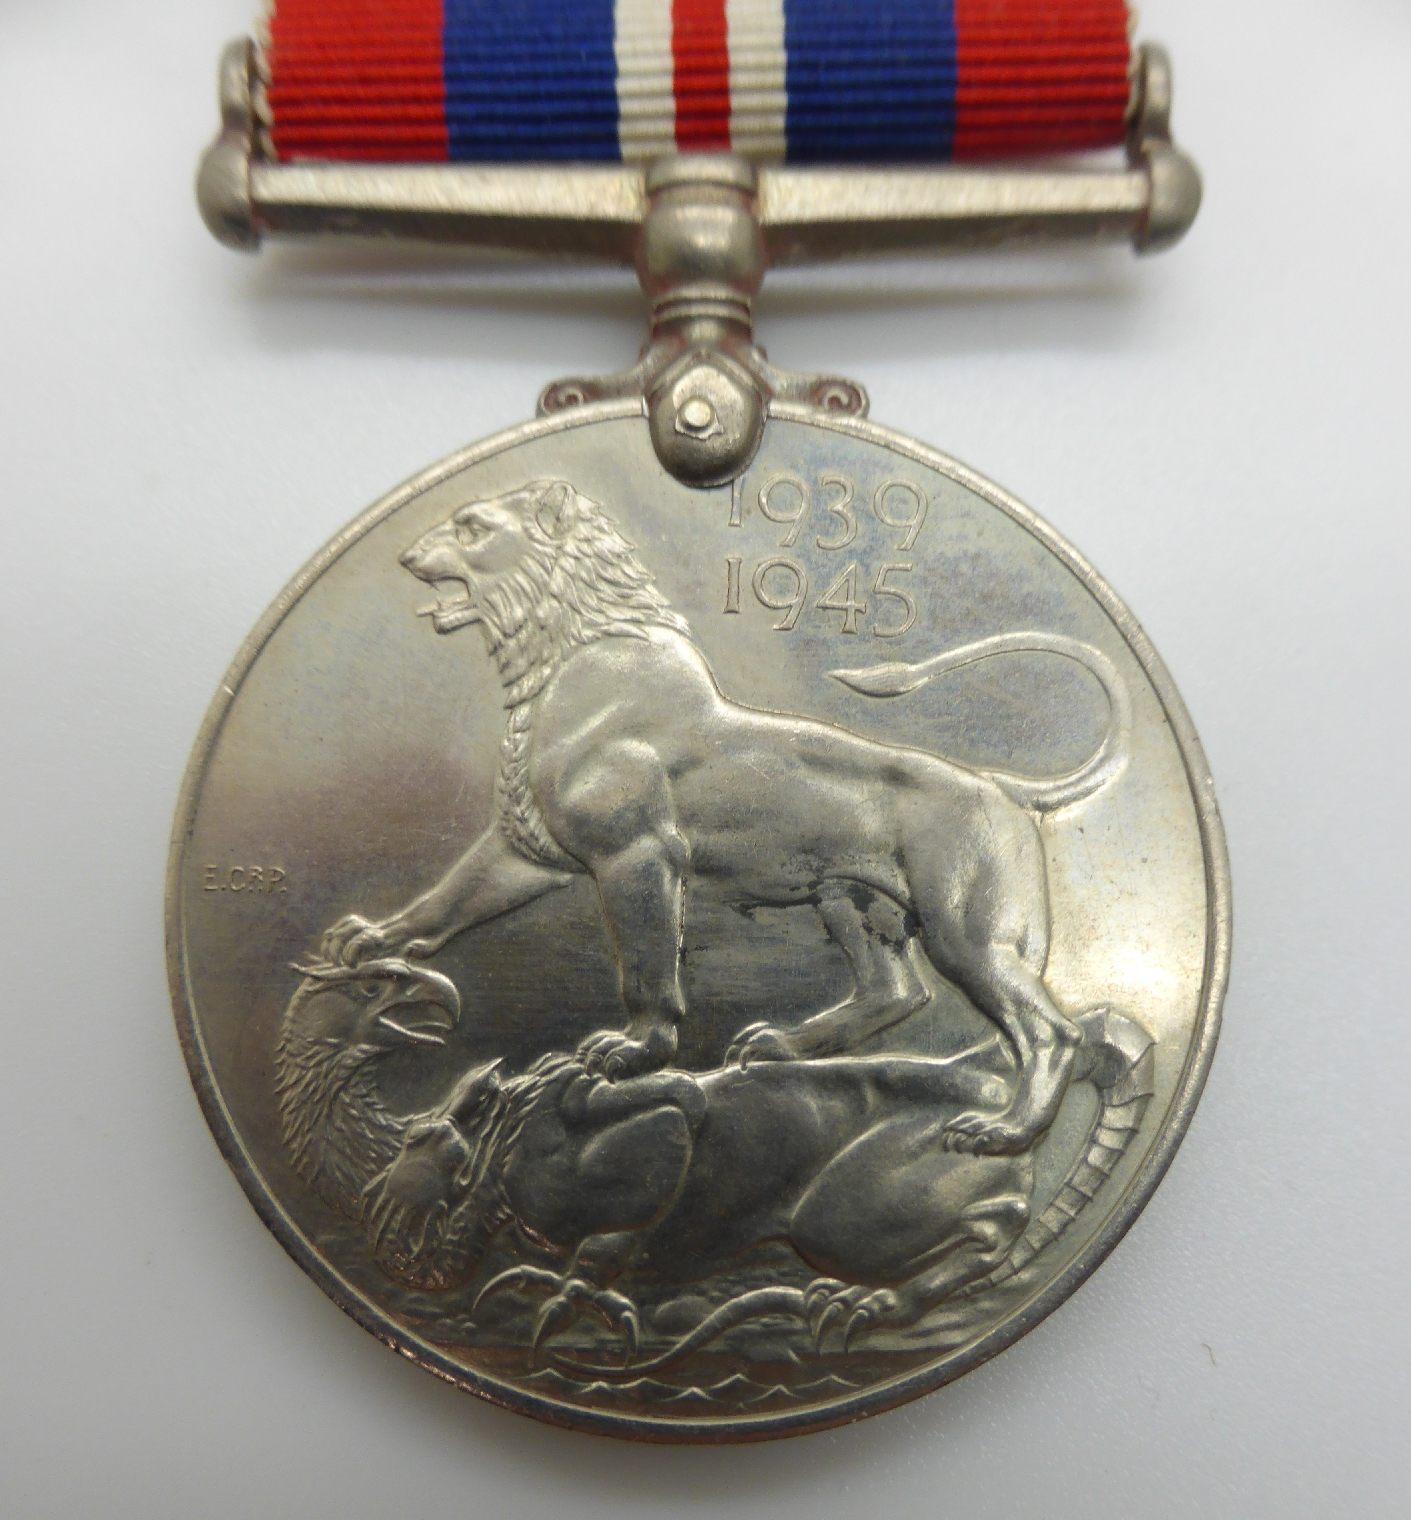 British Army WWII medals comprising 1939/45 Star, France and Germany Star, War Medal and Defence - Image 10 of 20